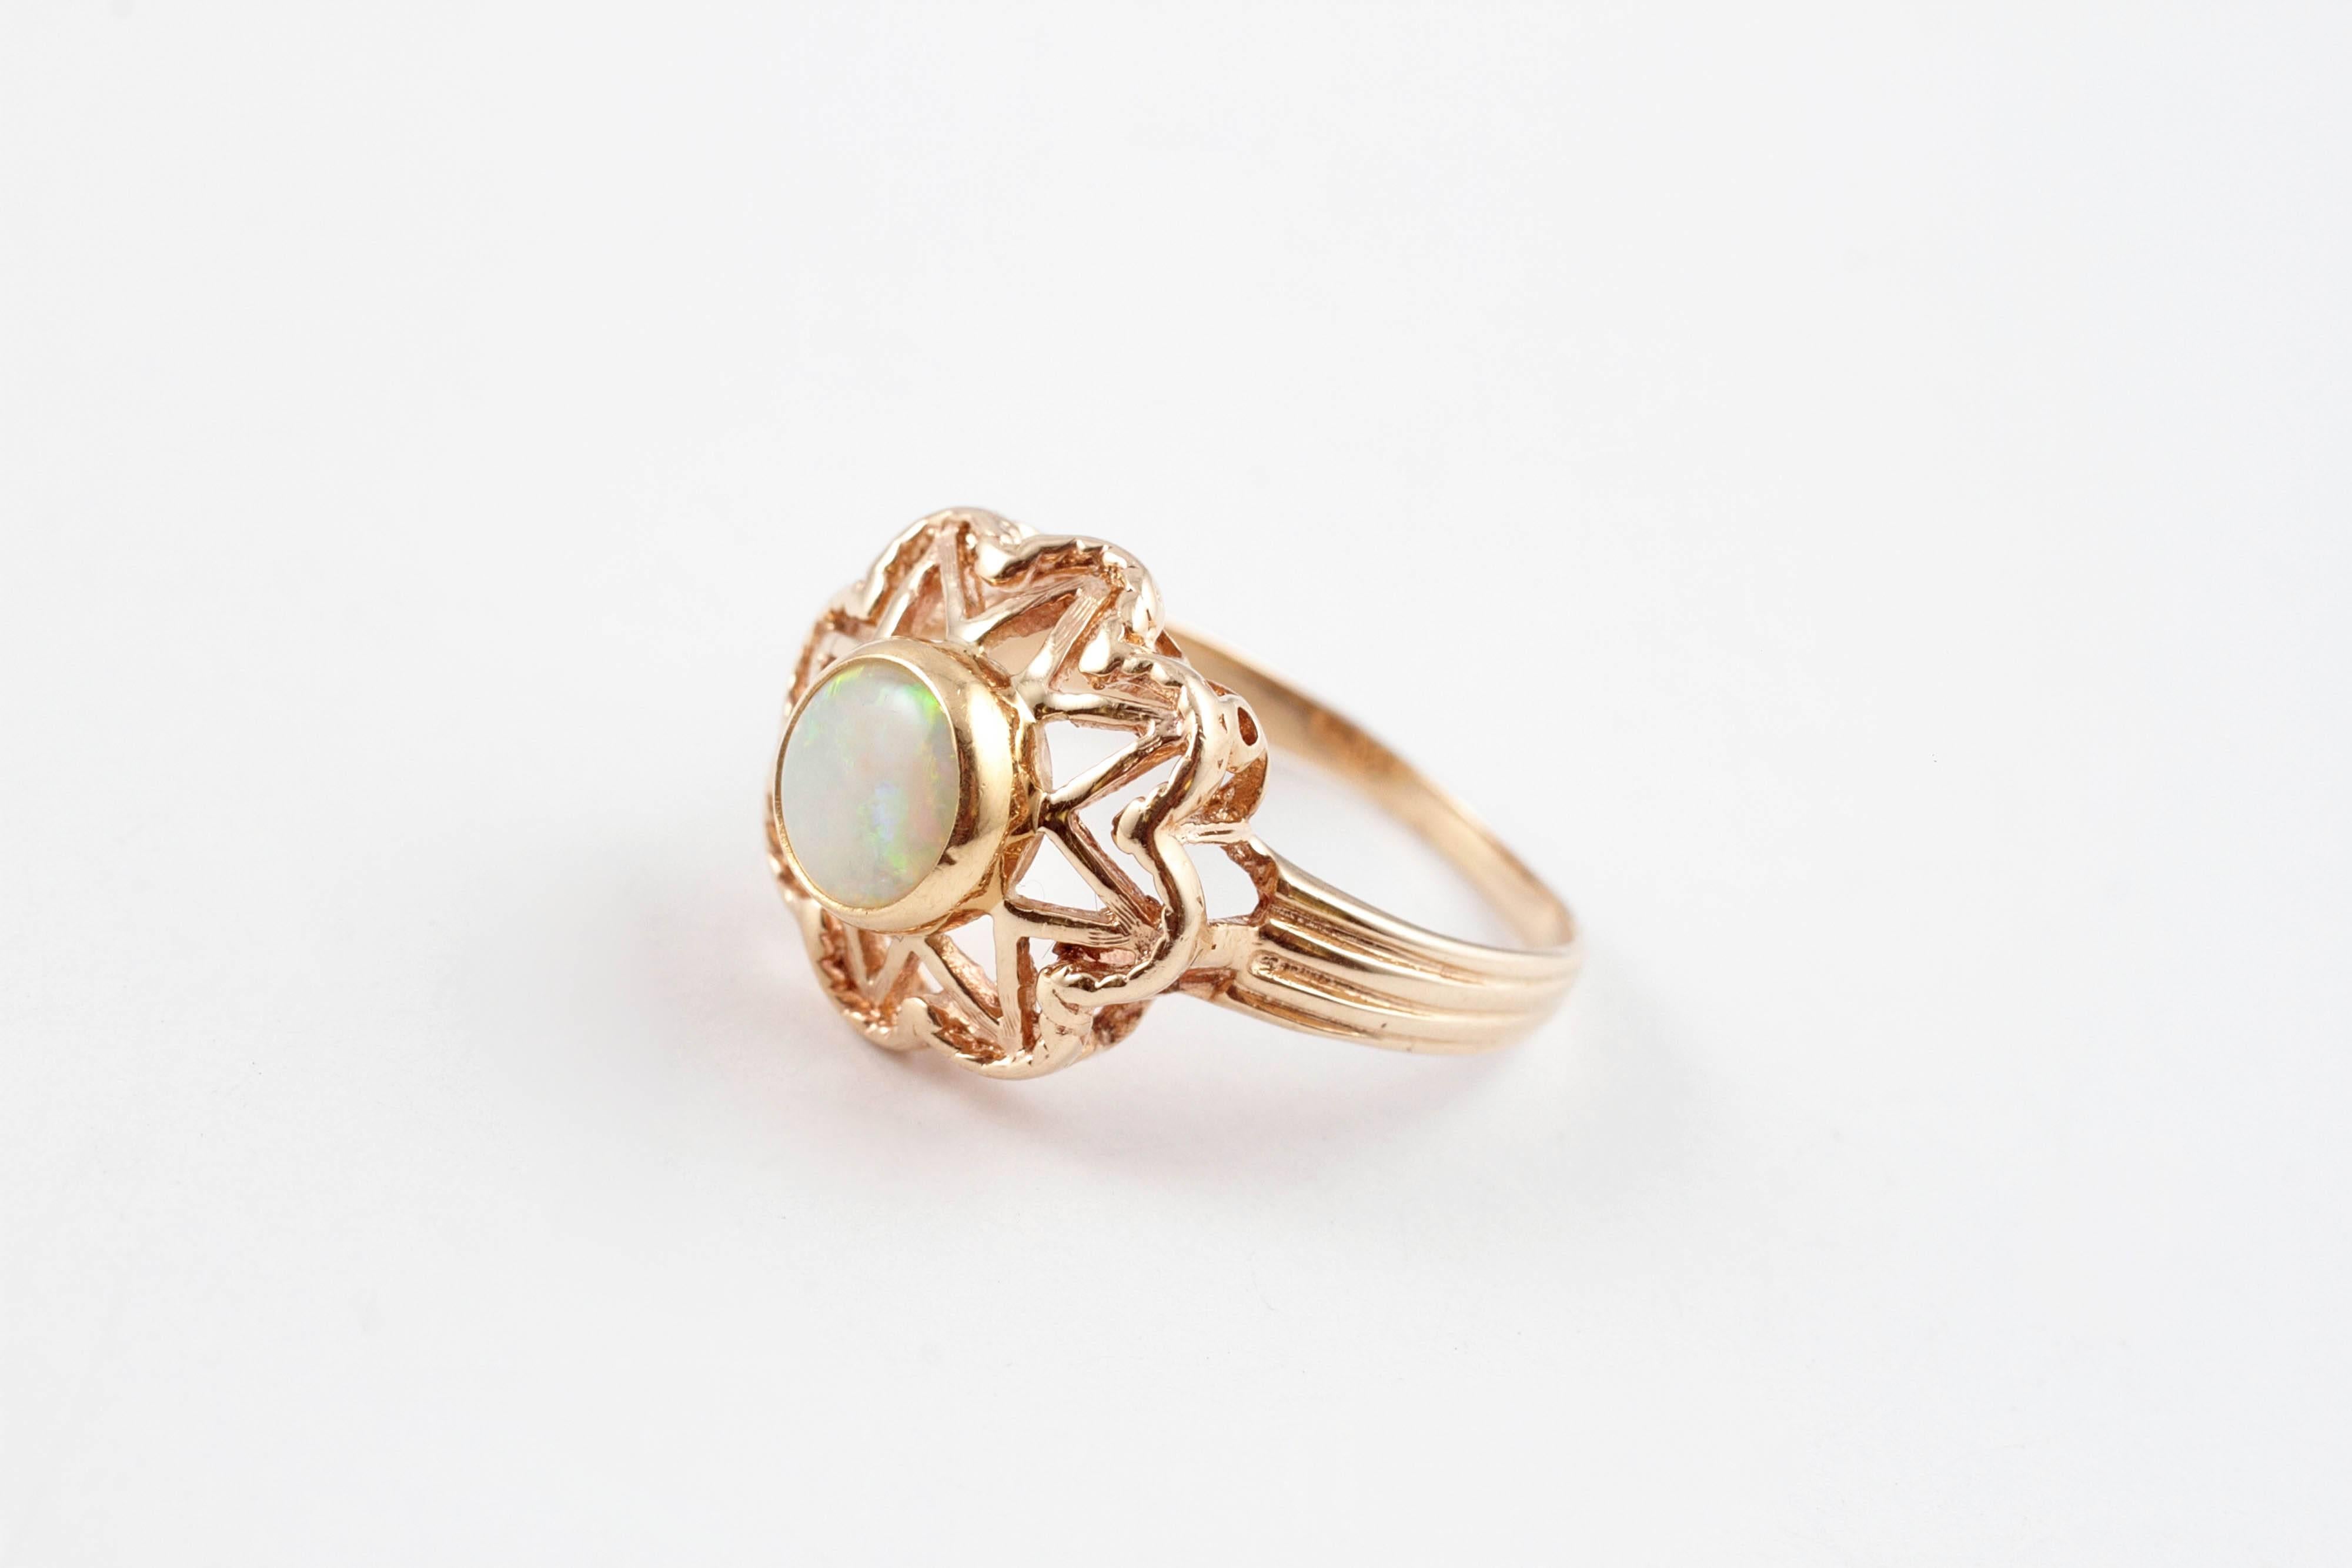 Round opal in star shaped mounting made of 14 Karat yellow gold.  Size 7 1/4.